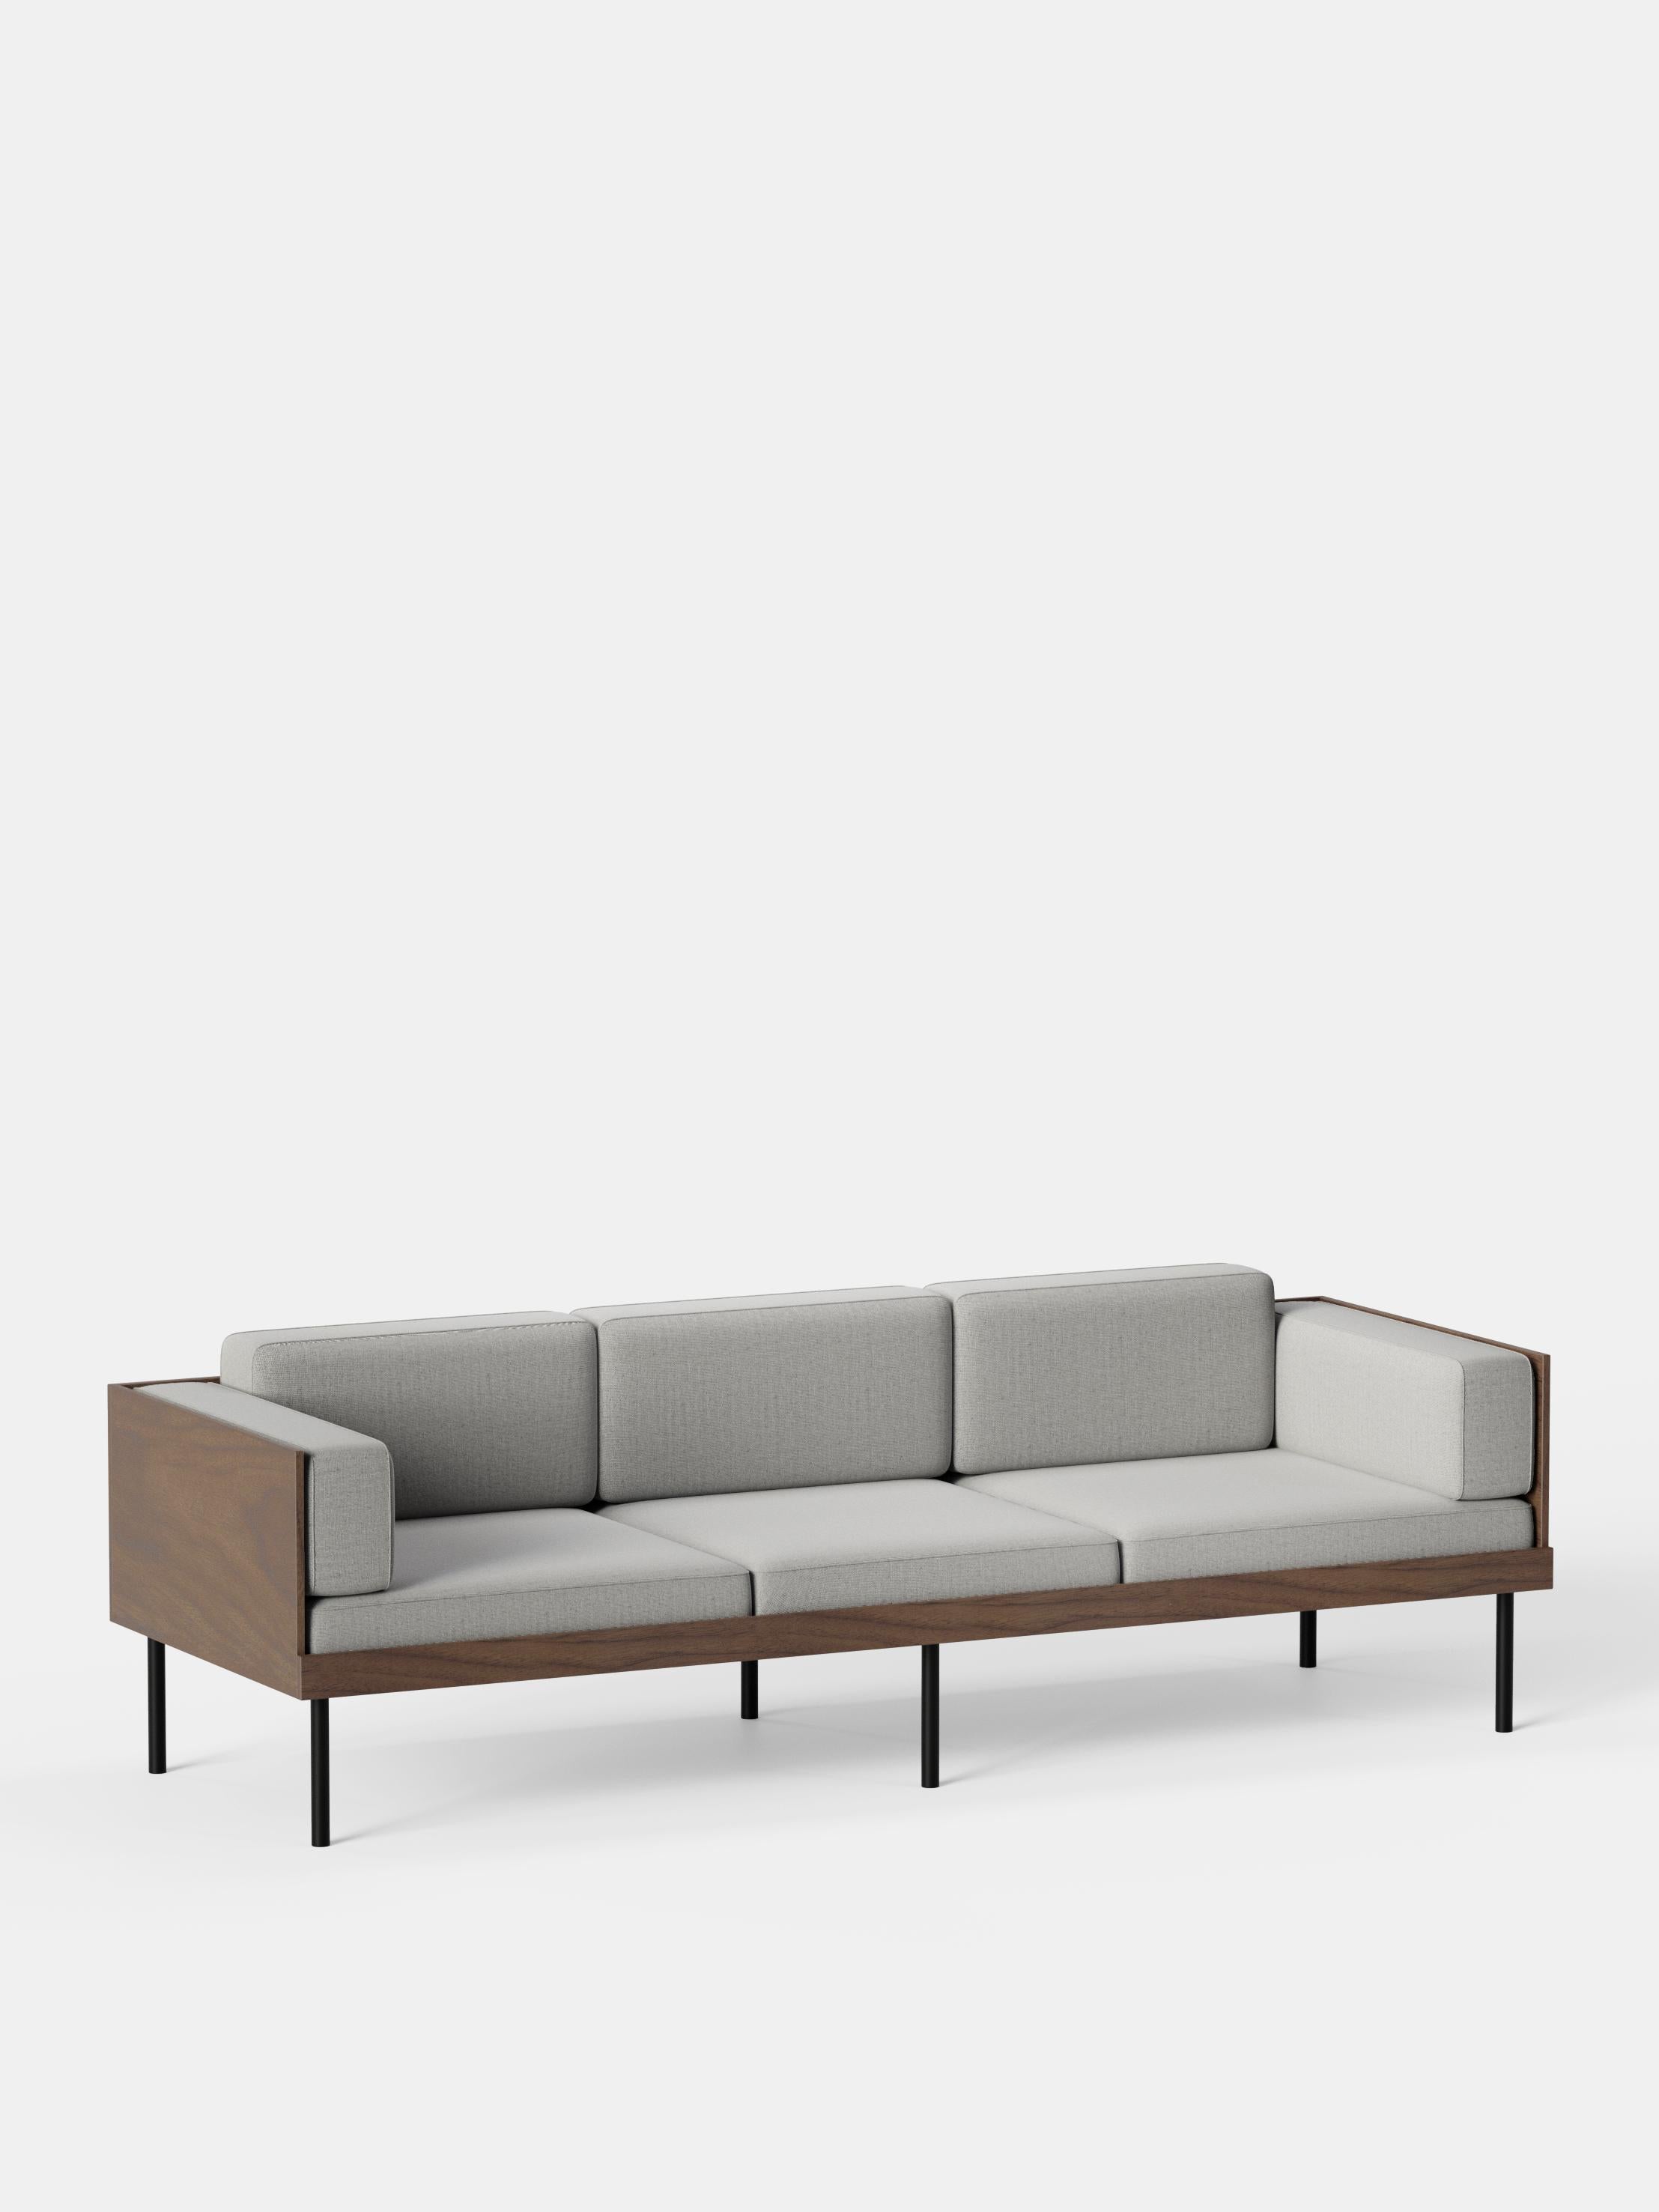 Grey Cut Sofa by Kann Design
Dimensions: D 80 x W 230 x H 72 cm.
Materials: Solid wood, steel, wood veneer, HR foam, fabric upholstery Kvadrat Remix 126 (90% wool, 10% nylon).
Available in other fabrics.

The Cut sofa has a deep, comfortable seat